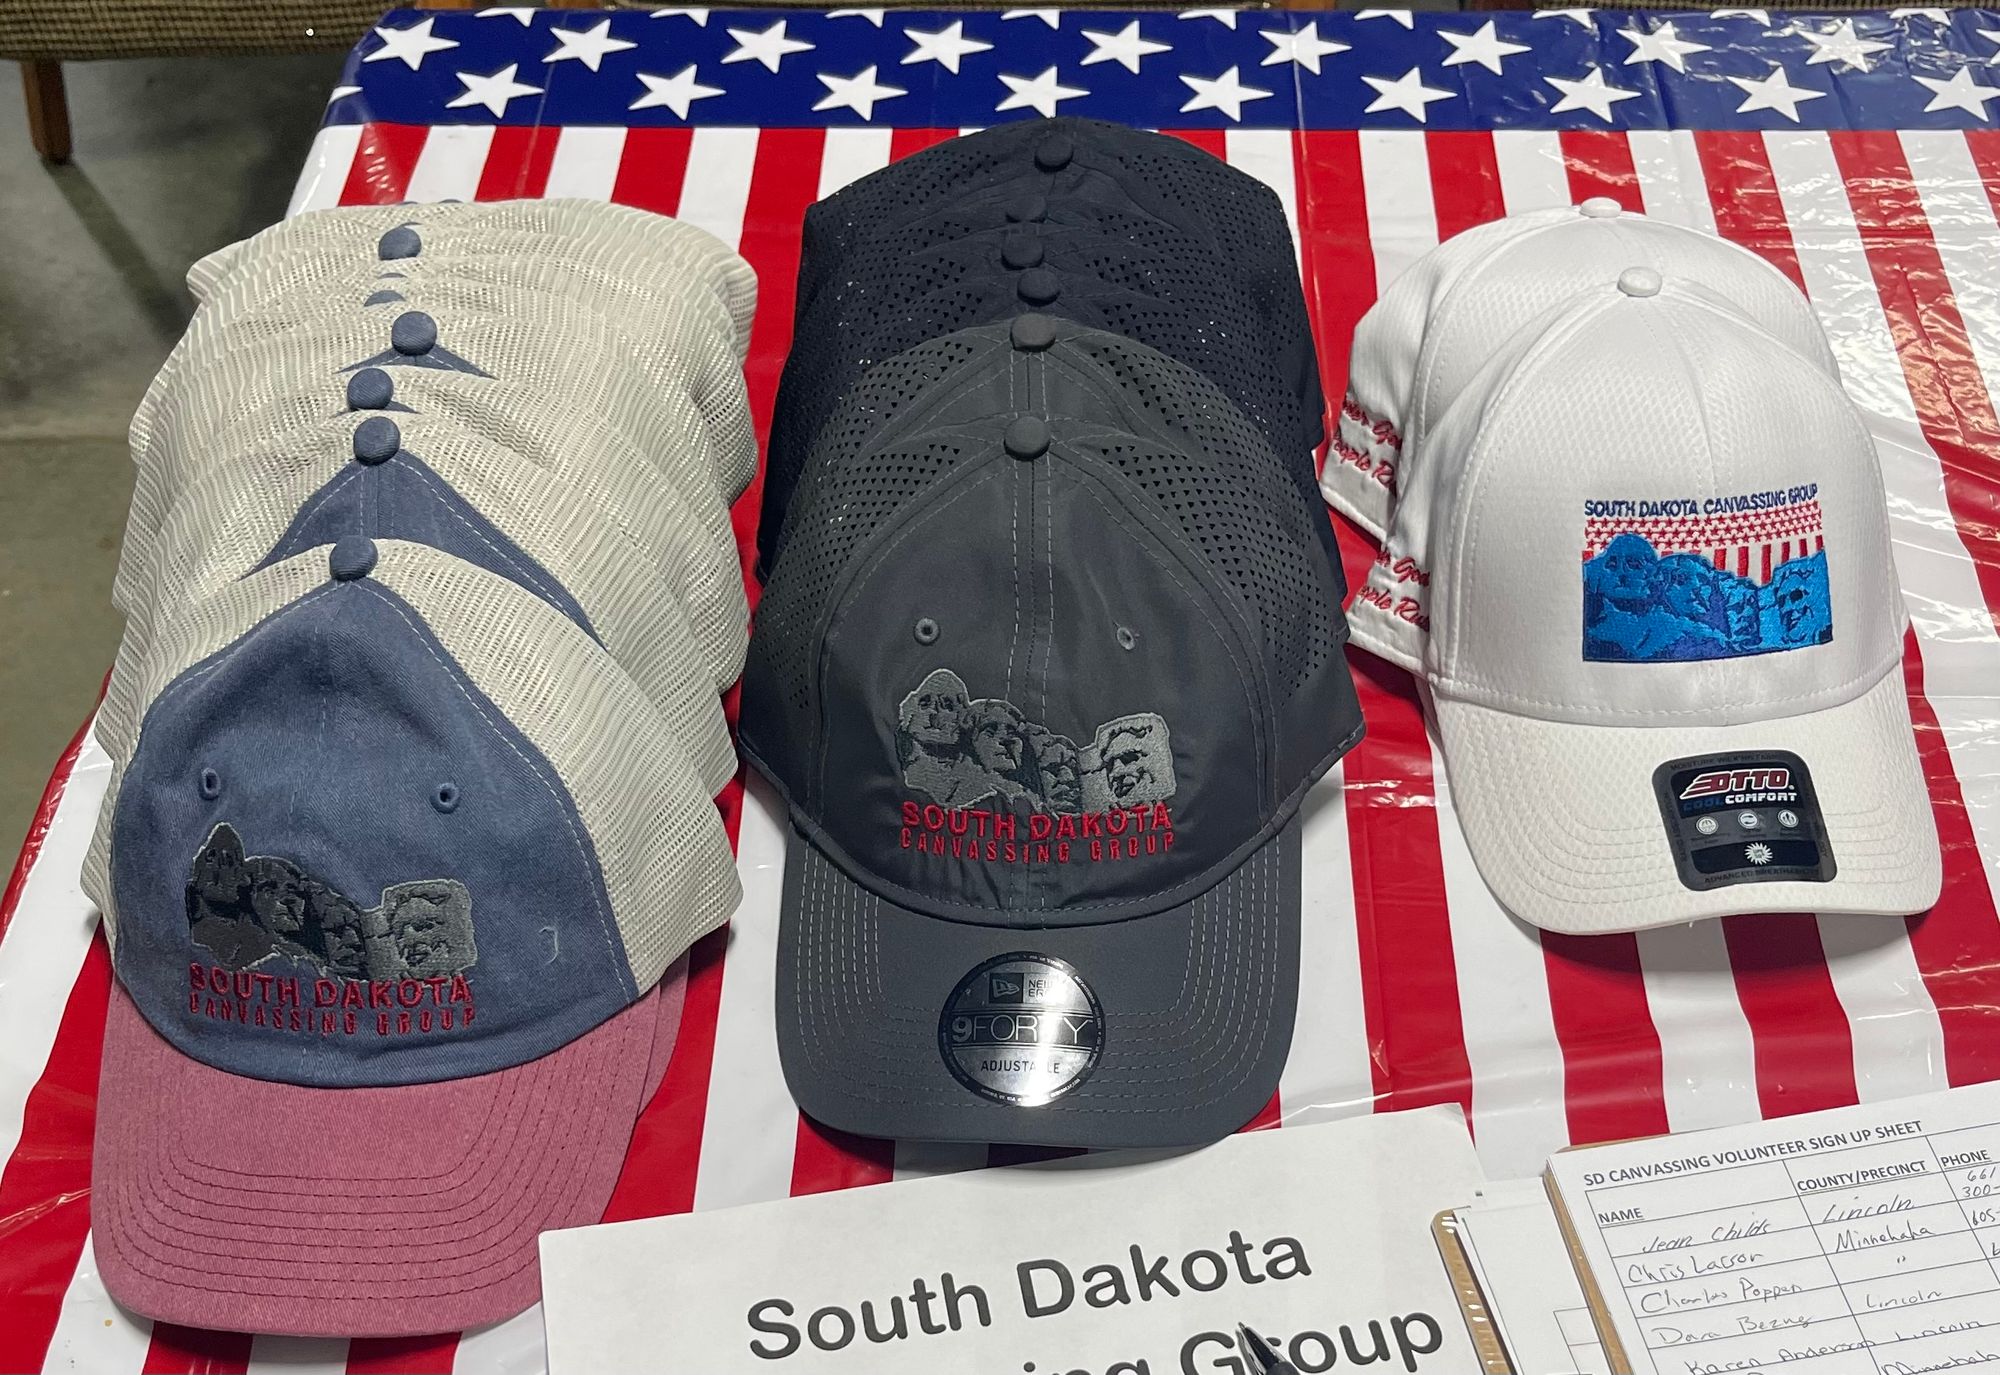 A row of caps featuring Mount Rushmore are shown on a table at the Caps for sale at a South Dakota Canvassing Group event at the Military Heritage Alliance in Sioux Falls, South Dakota.